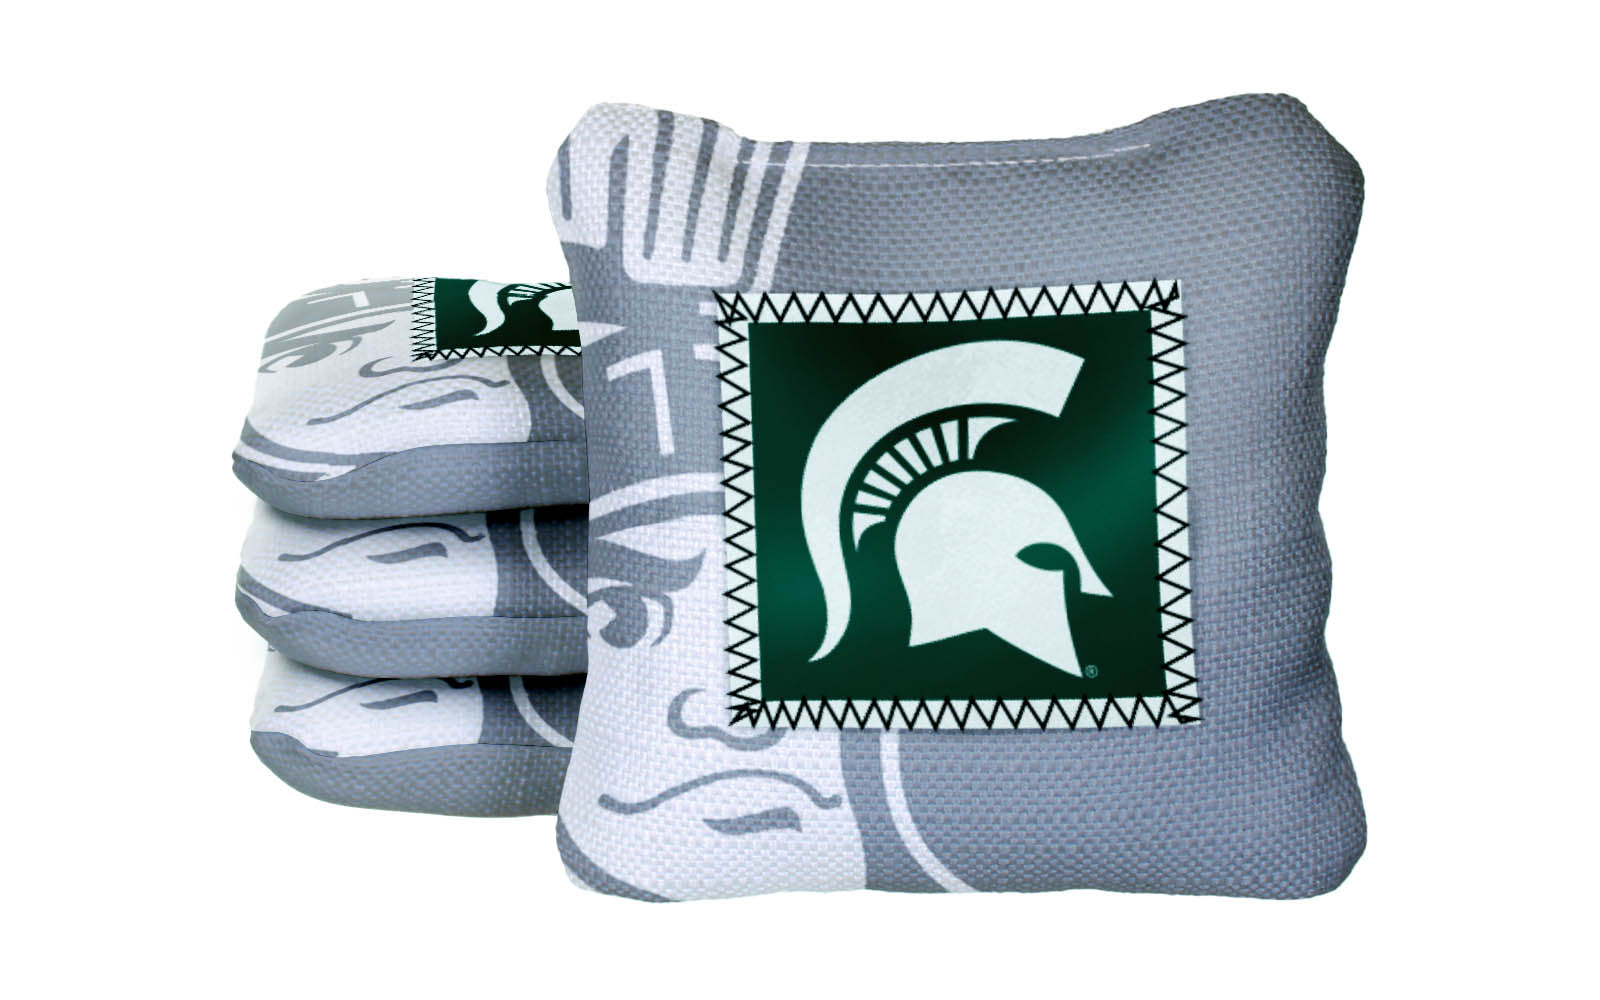 Officially Licensed Collegiate Cornhole Bags - AllCornhole Game Changers Steady 2.0 - Set of 4 - Michigan State University